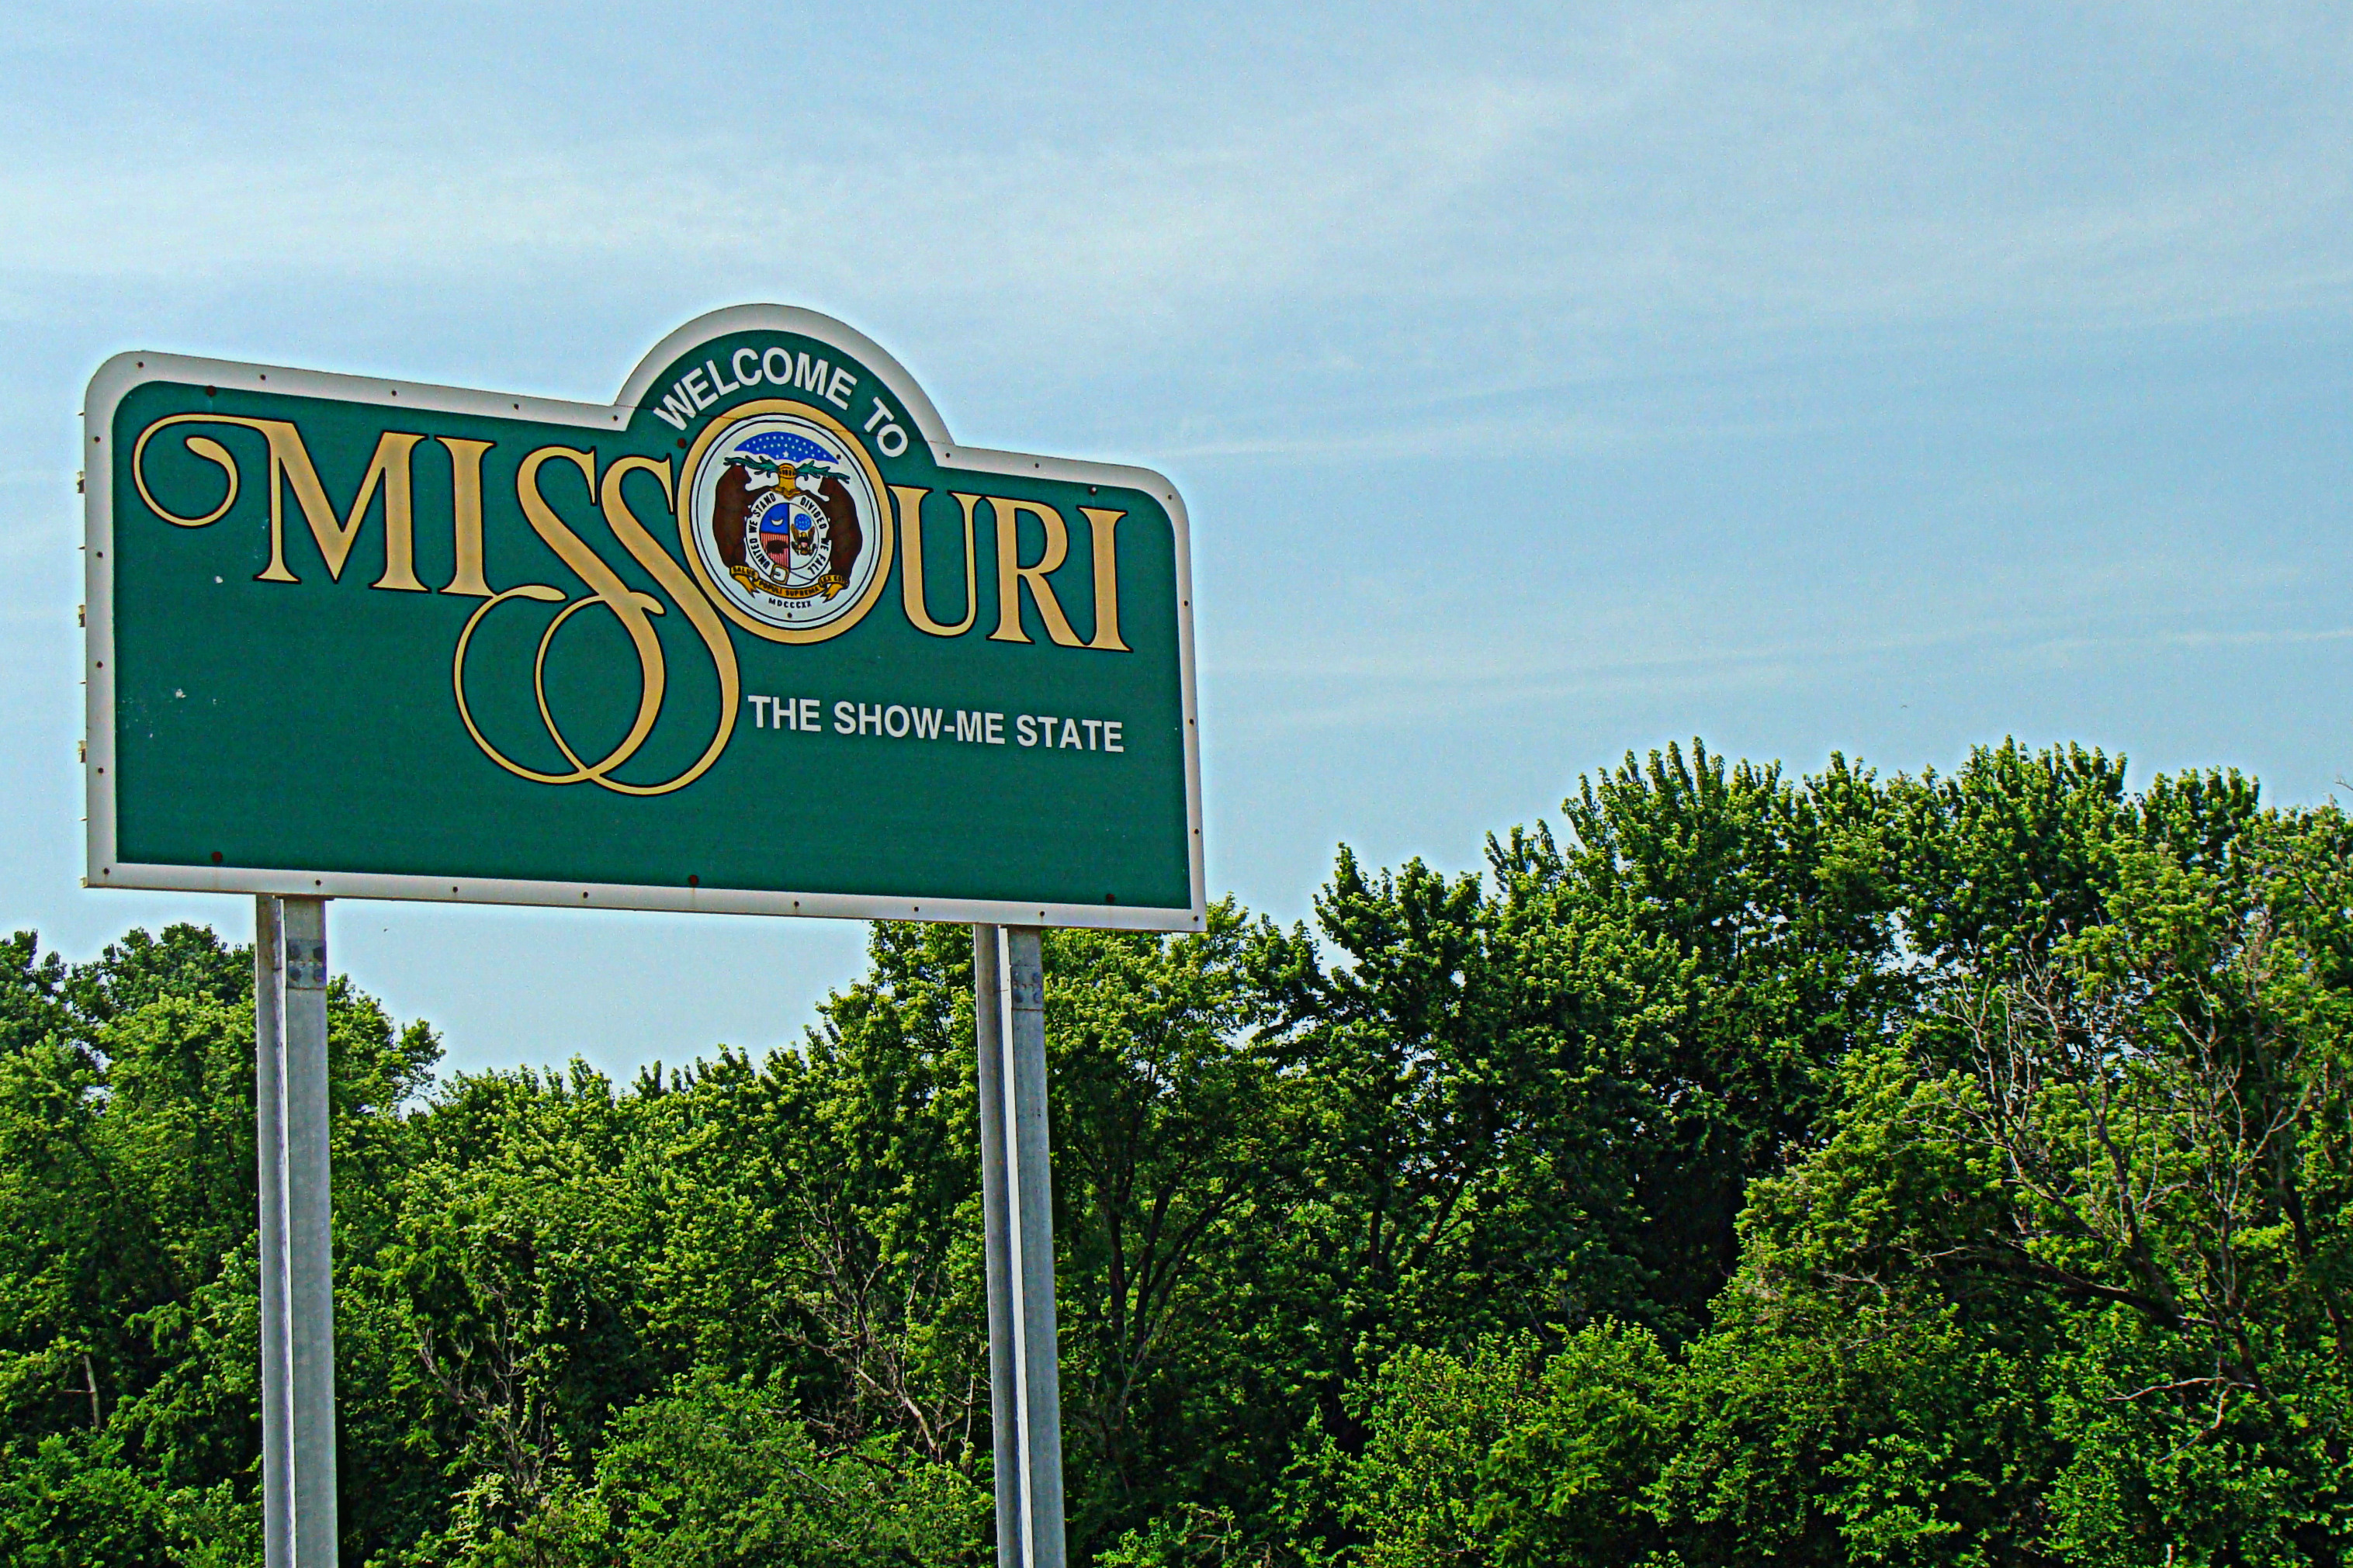 Report #2: Out of State Influence in Missouri